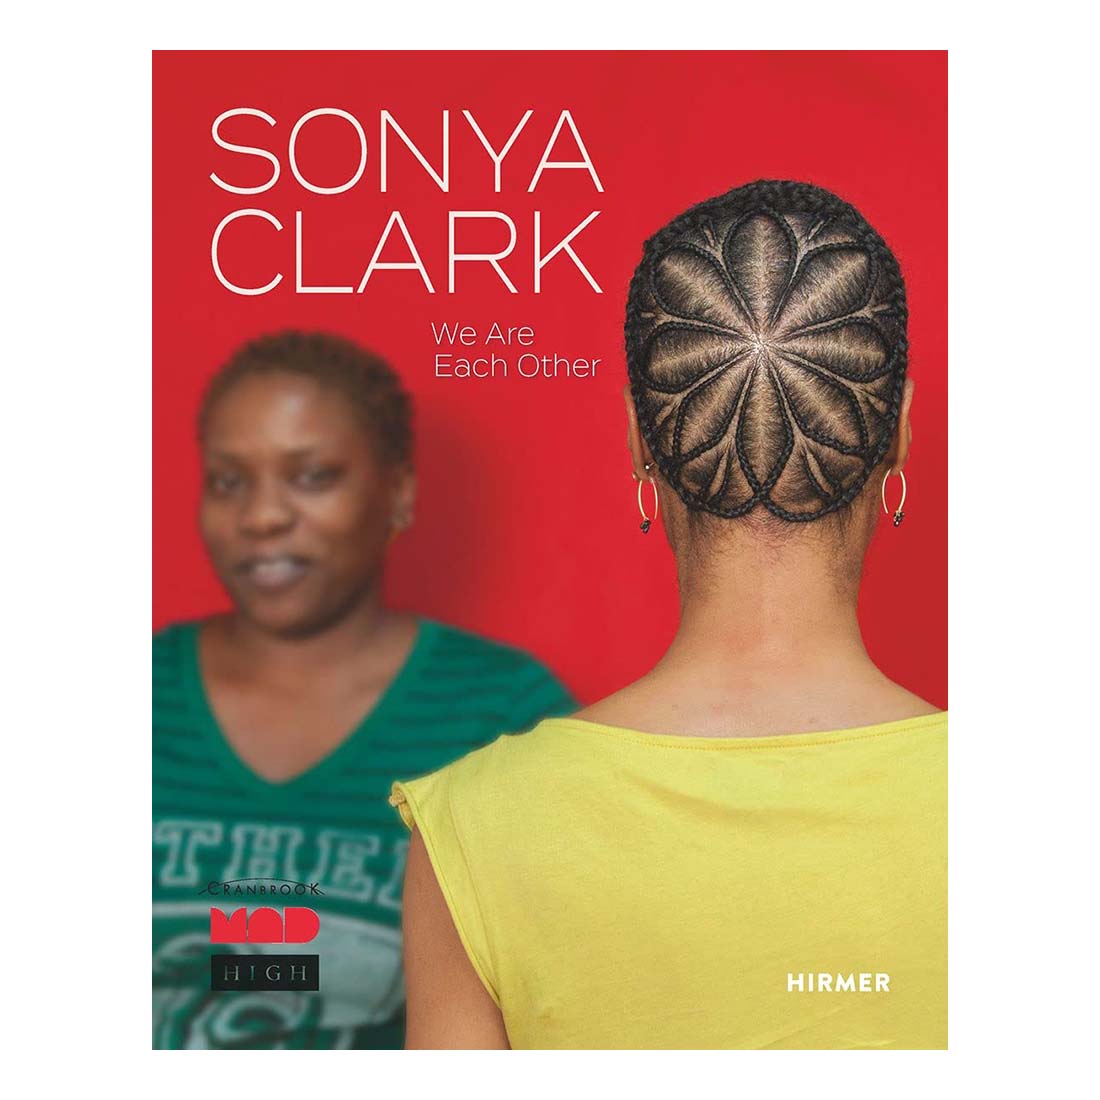 Sonya Clark: We Are Each Other